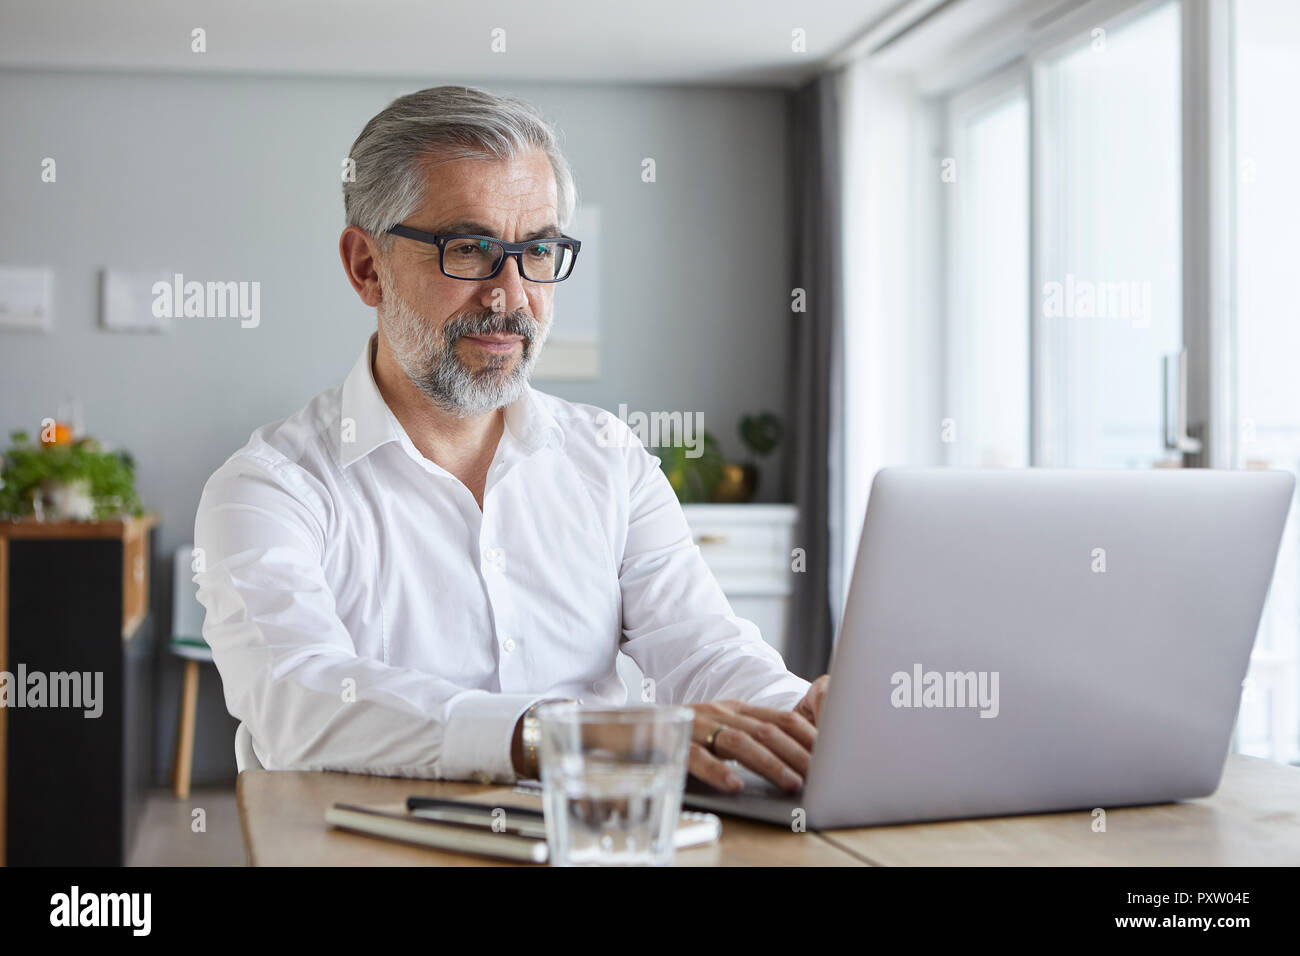 Portrait of mature man using laptop at home Stock Photo